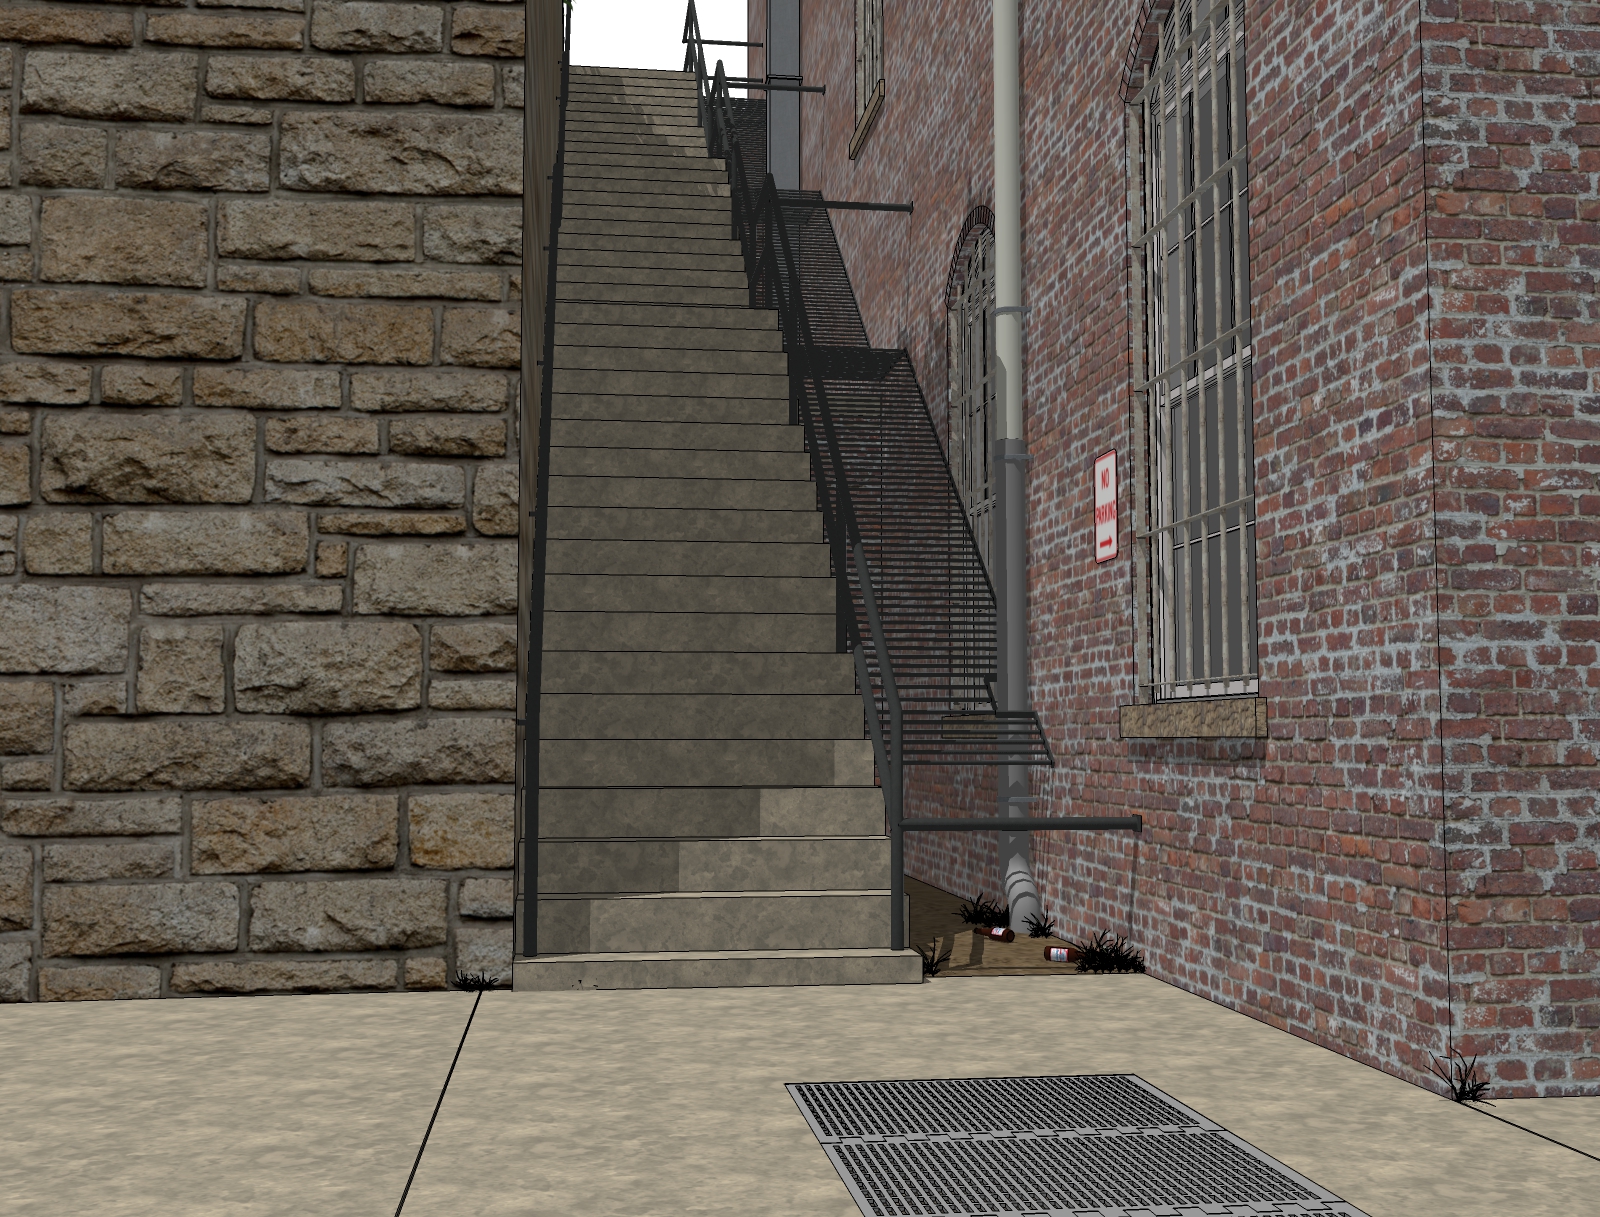 more stairs_textures.jpg